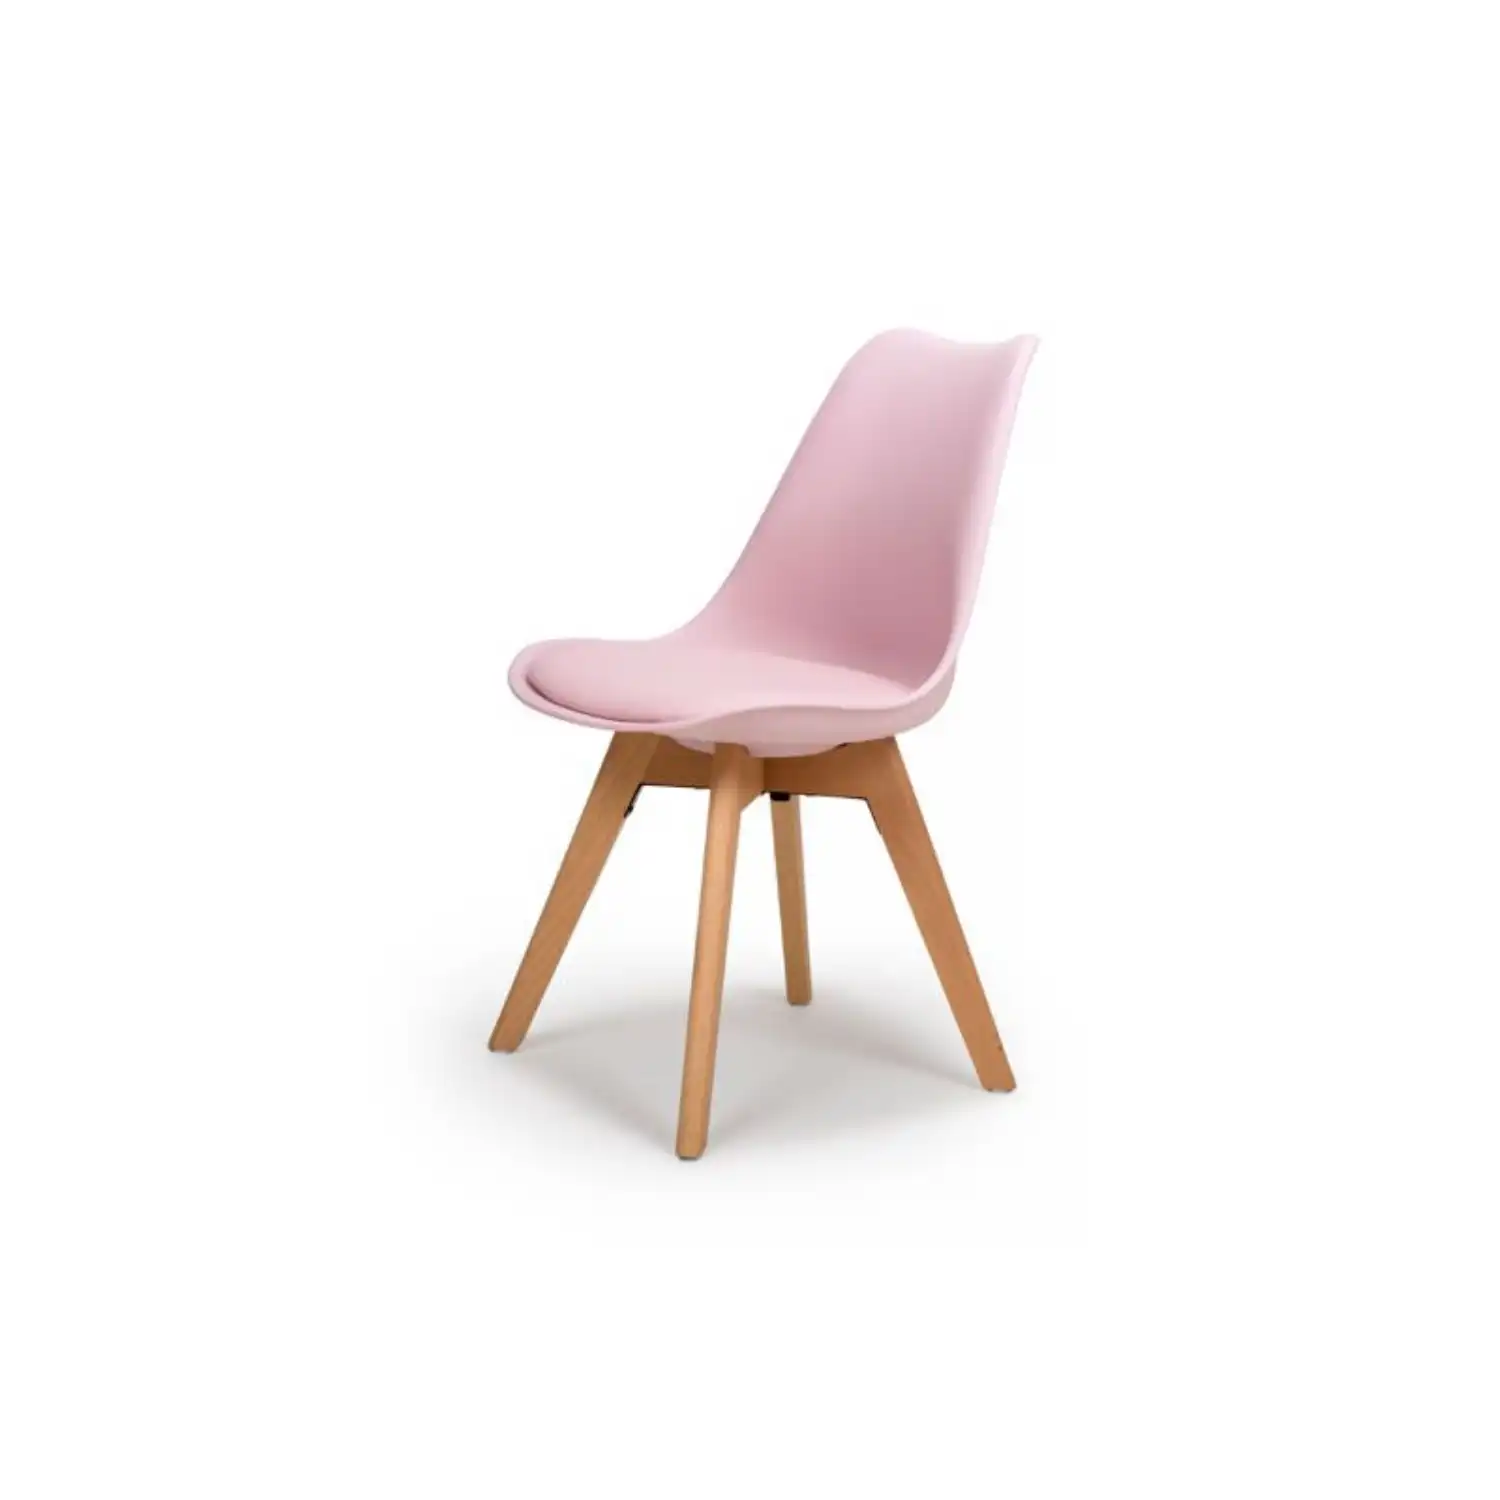 Pink PU Padded Seat Dining Chair Natural Beech Wood Legs